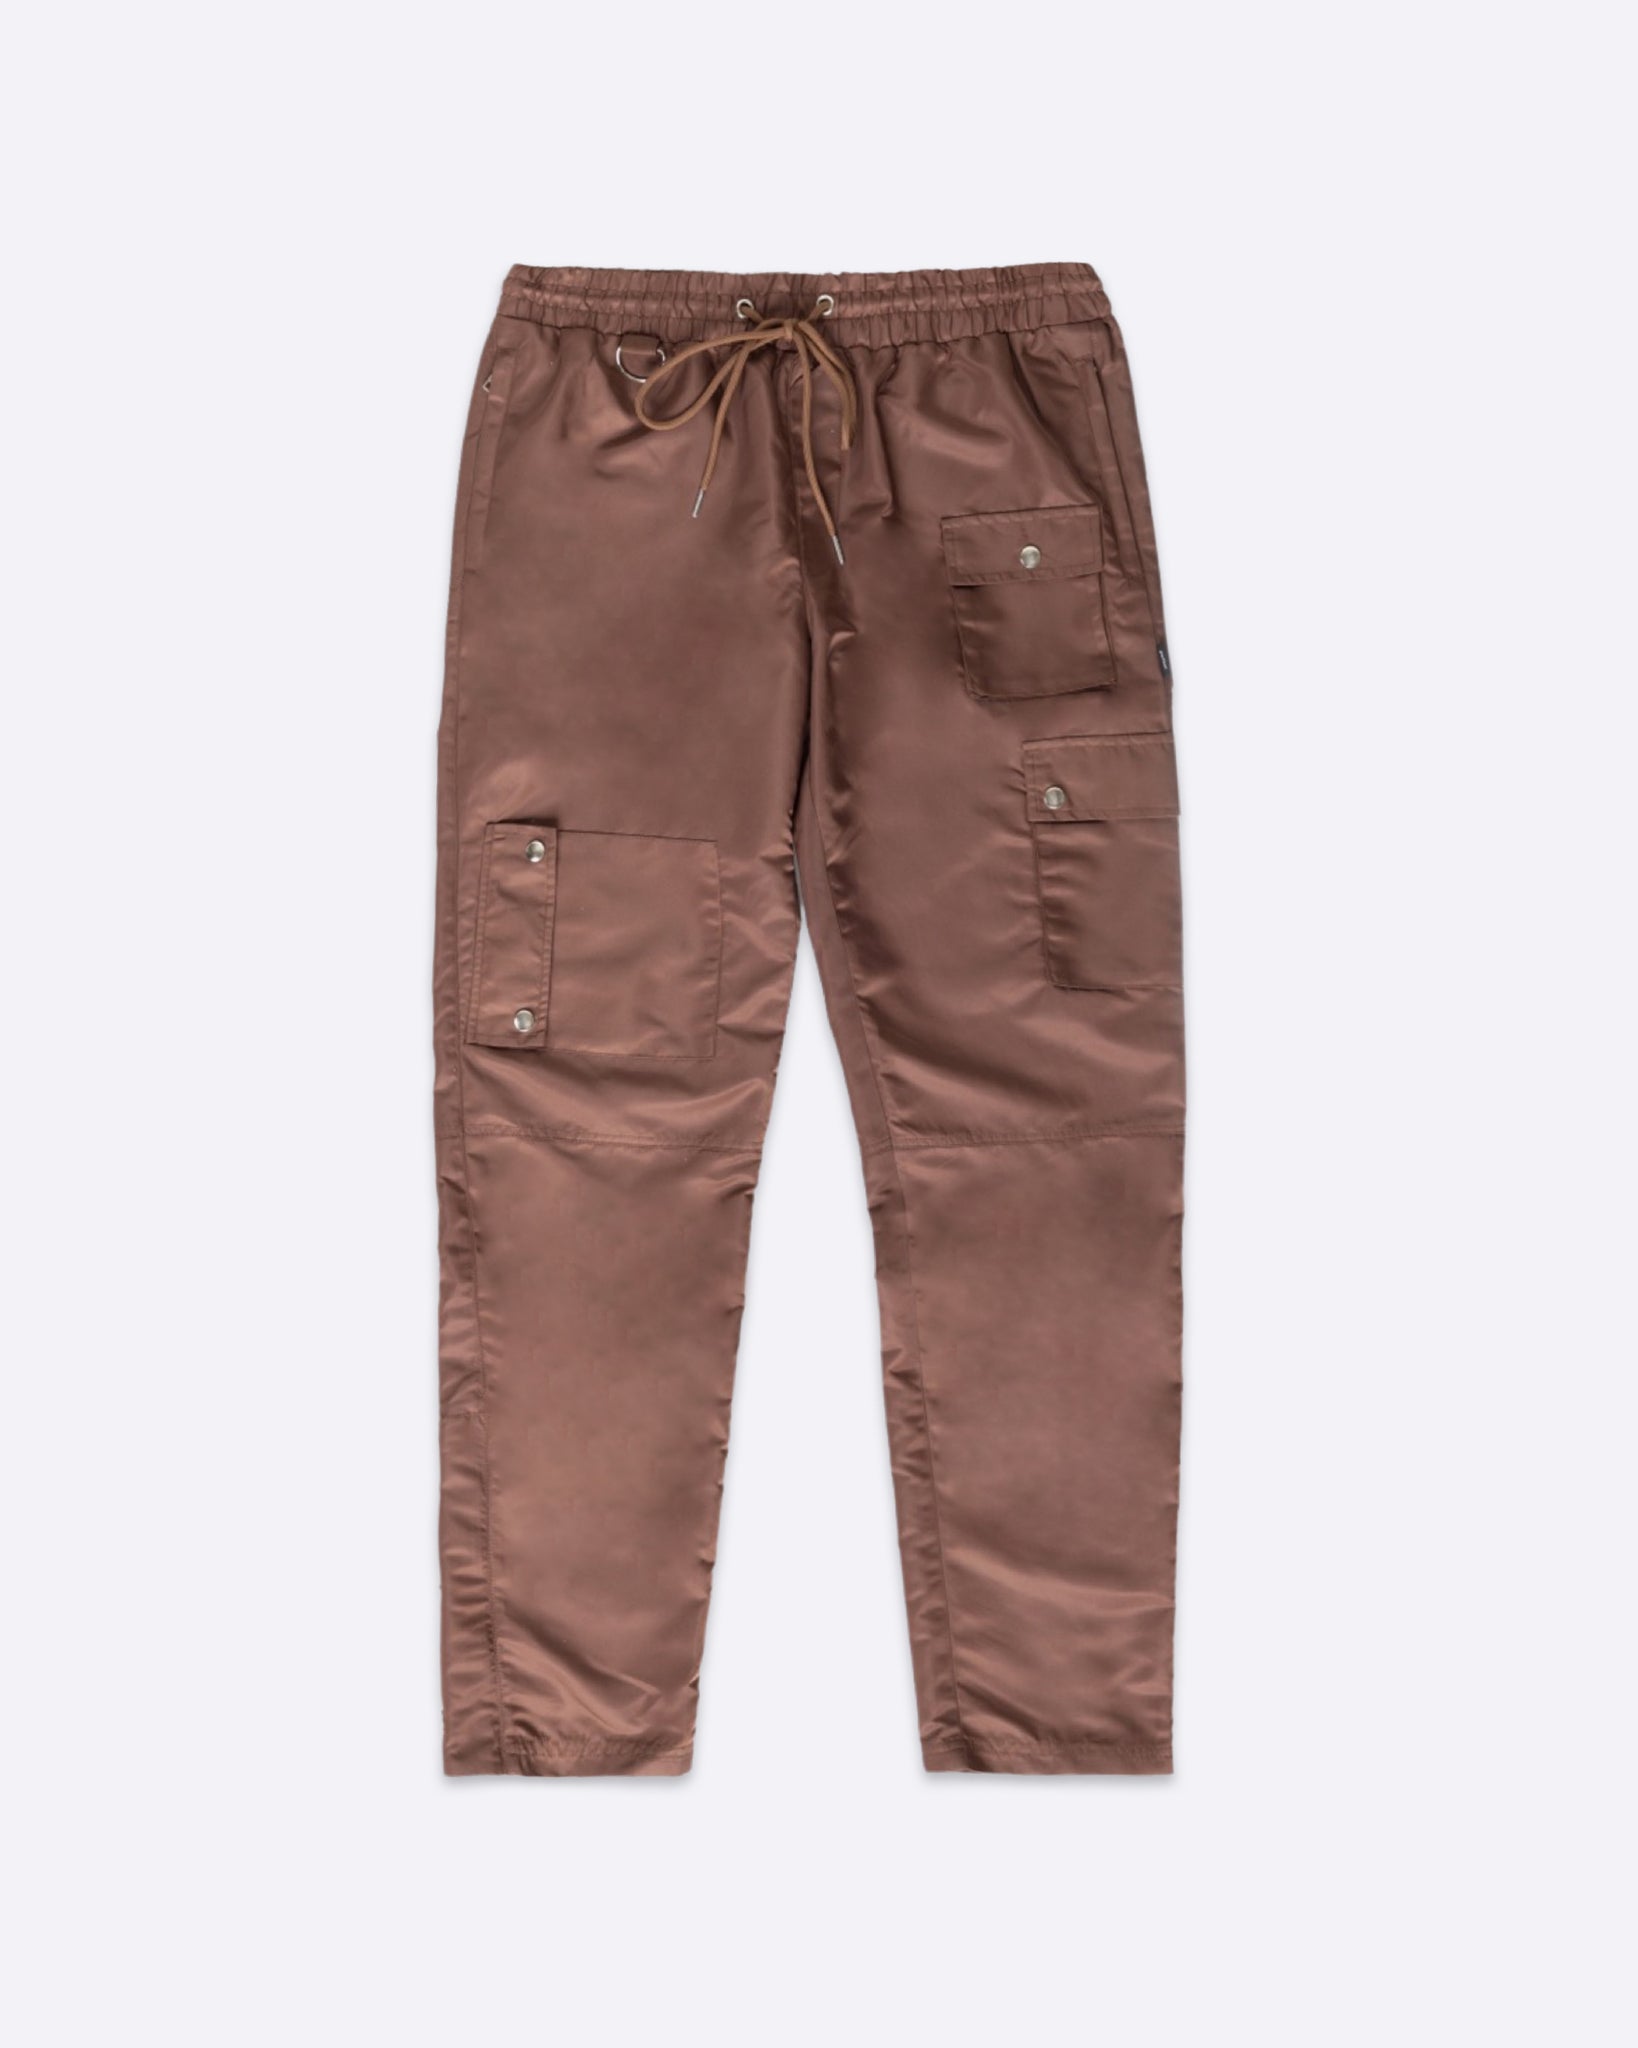 EPTM ROVER UTILITY PANTS- BROWN